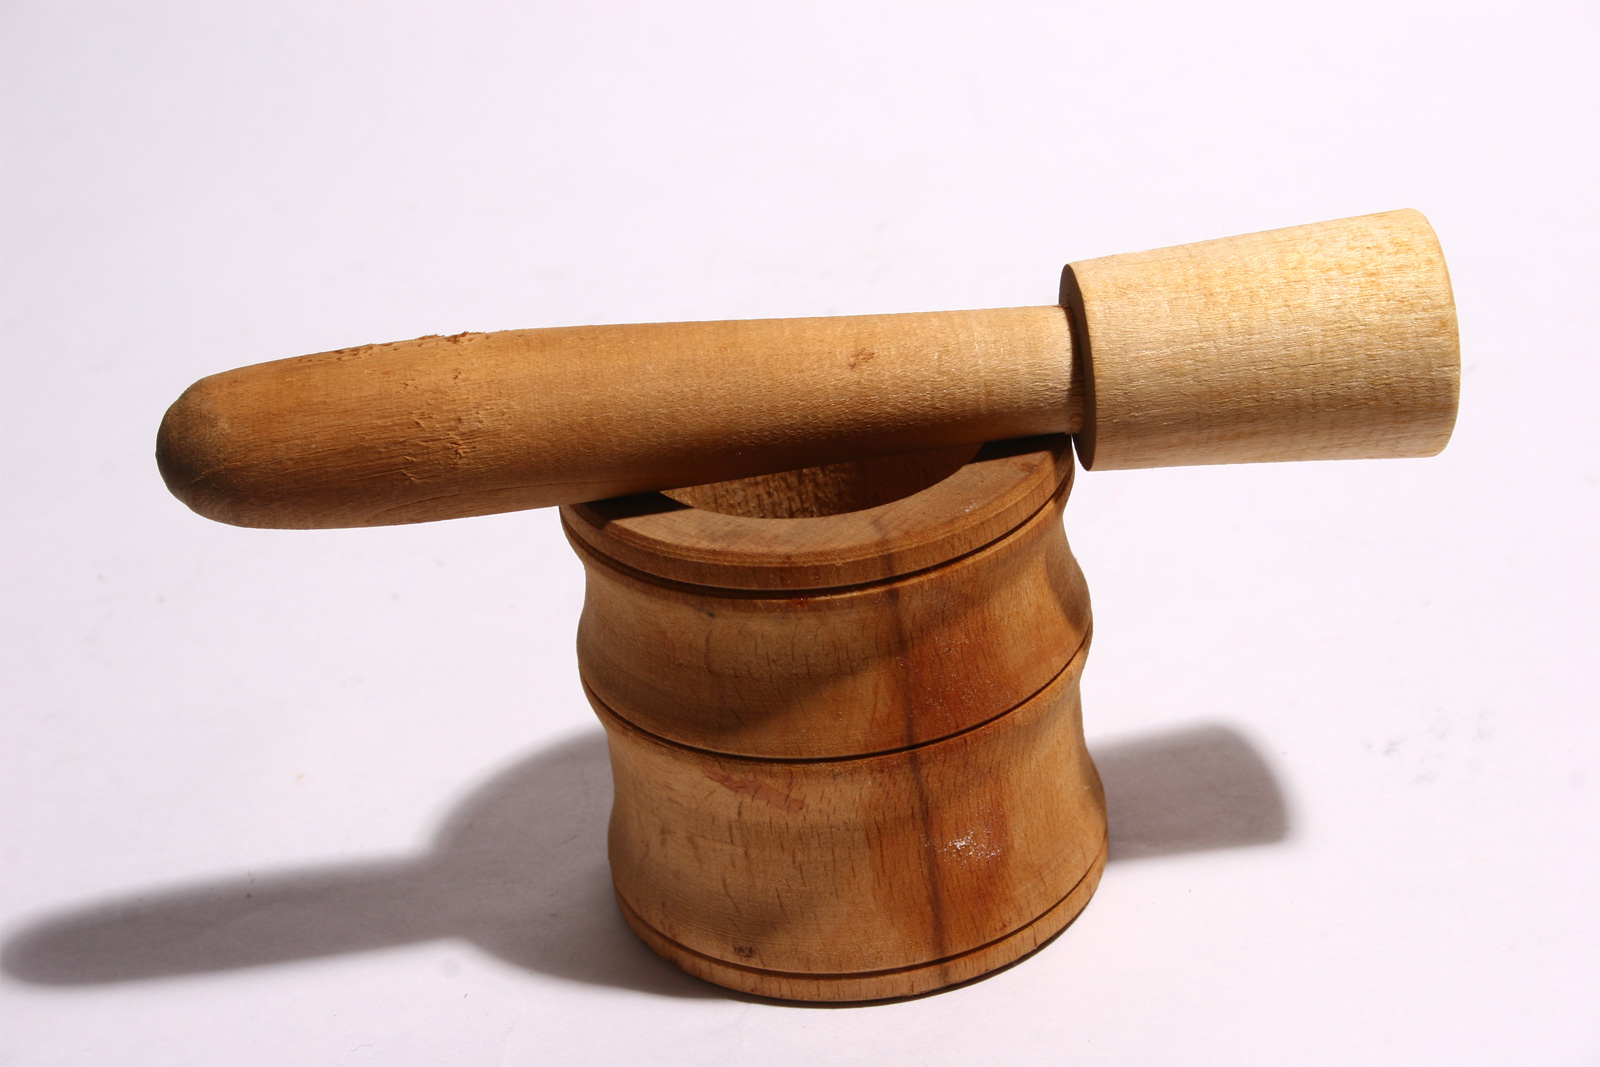 Wooden mortar and pestle on white